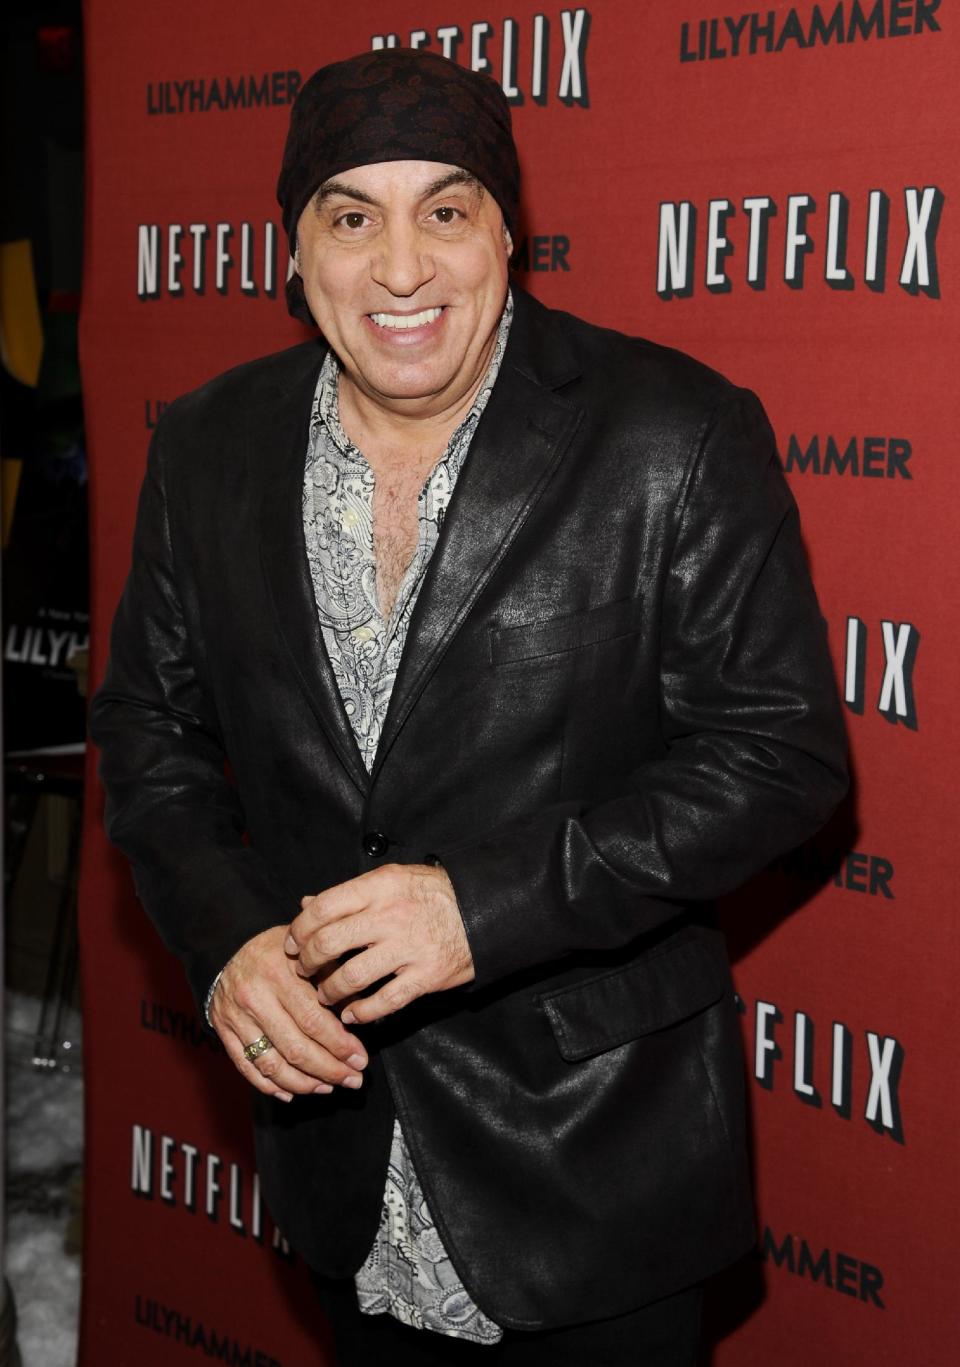 FILE - In this Feb. 1, 2012 file photo, musician and actor Steven Van Zandt attends the premiere of a Netflix original series "Lilyhammer" at the Crosby Street Hotel in New York. Van Zandt has found a way to repay The Rascals for their influence on his music by taking the original four-man band to their biggest and most unlikely stage, on Broadway. The reunited band will play 15 performances at the Richard Rodgers Theatre beginning in April 2013, a show combining live performance, video reenactments, archival concert and news footage, op-art backdrops and psychedelic lighting. (AP Photo/Evan Agostini, File)